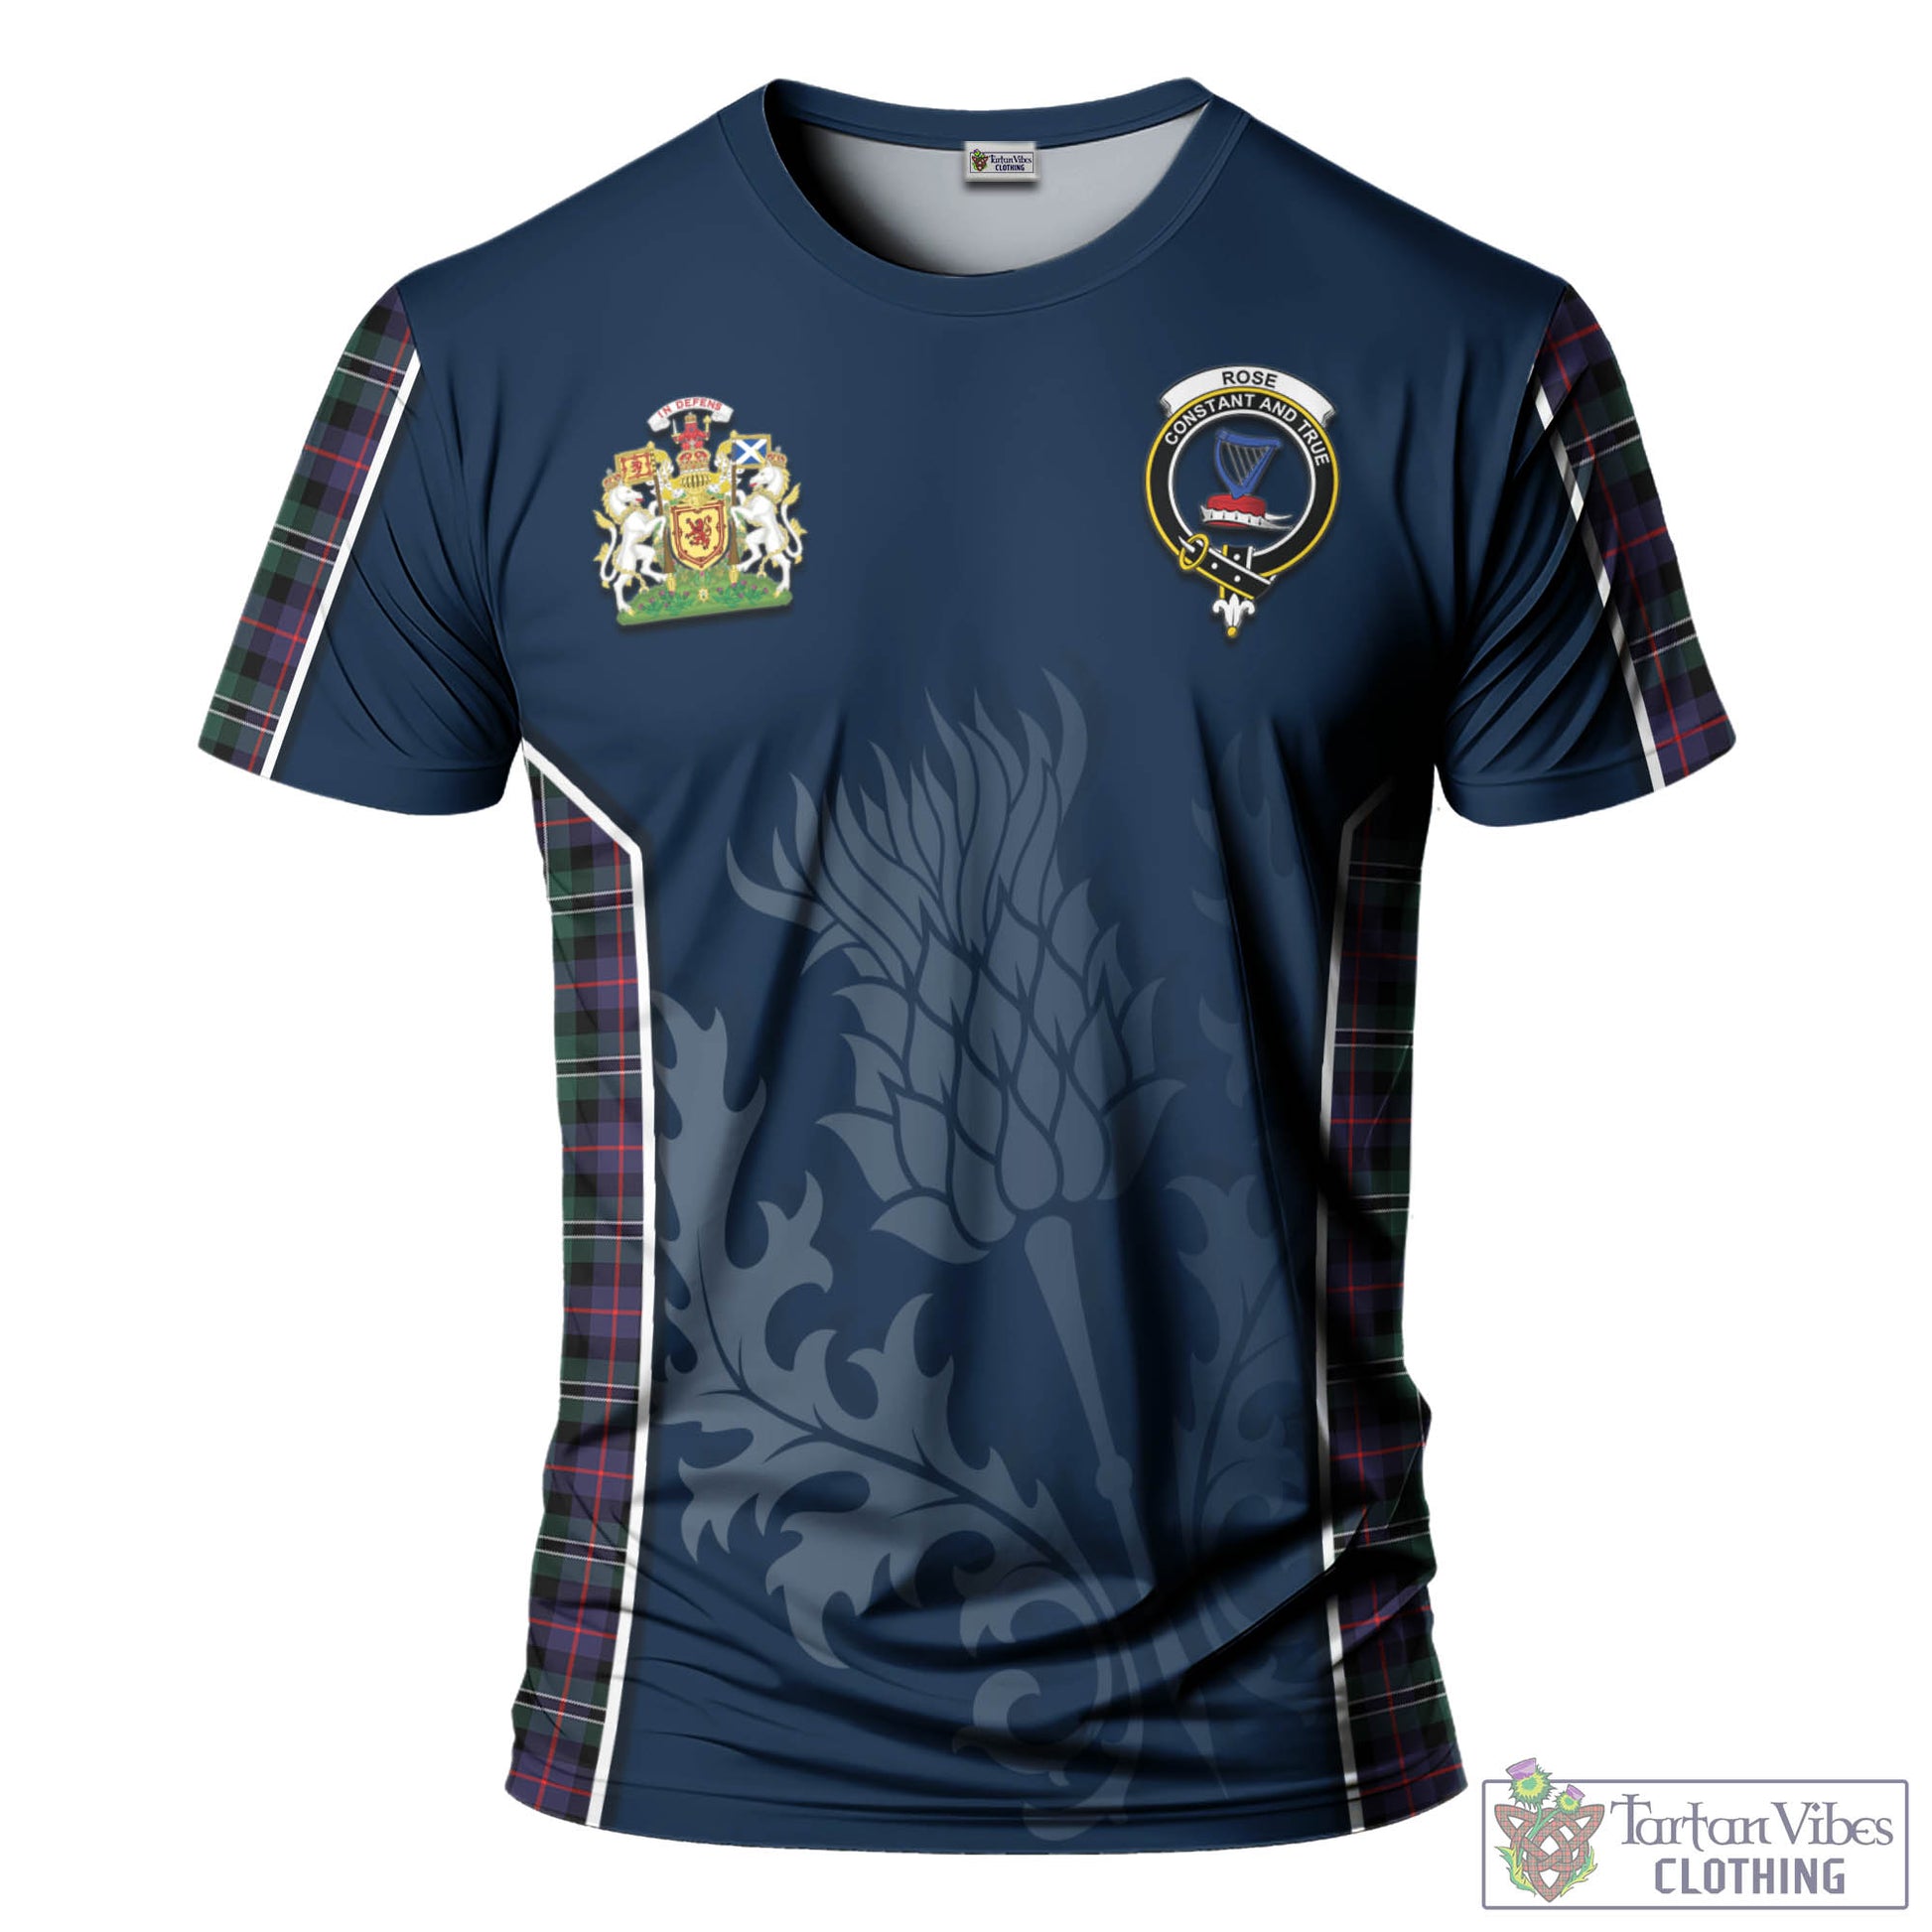 Tartan Vibes Clothing Rose Hunting Modern Tartan T-Shirt with Family Crest and Scottish Thistle Vibes Sport Style